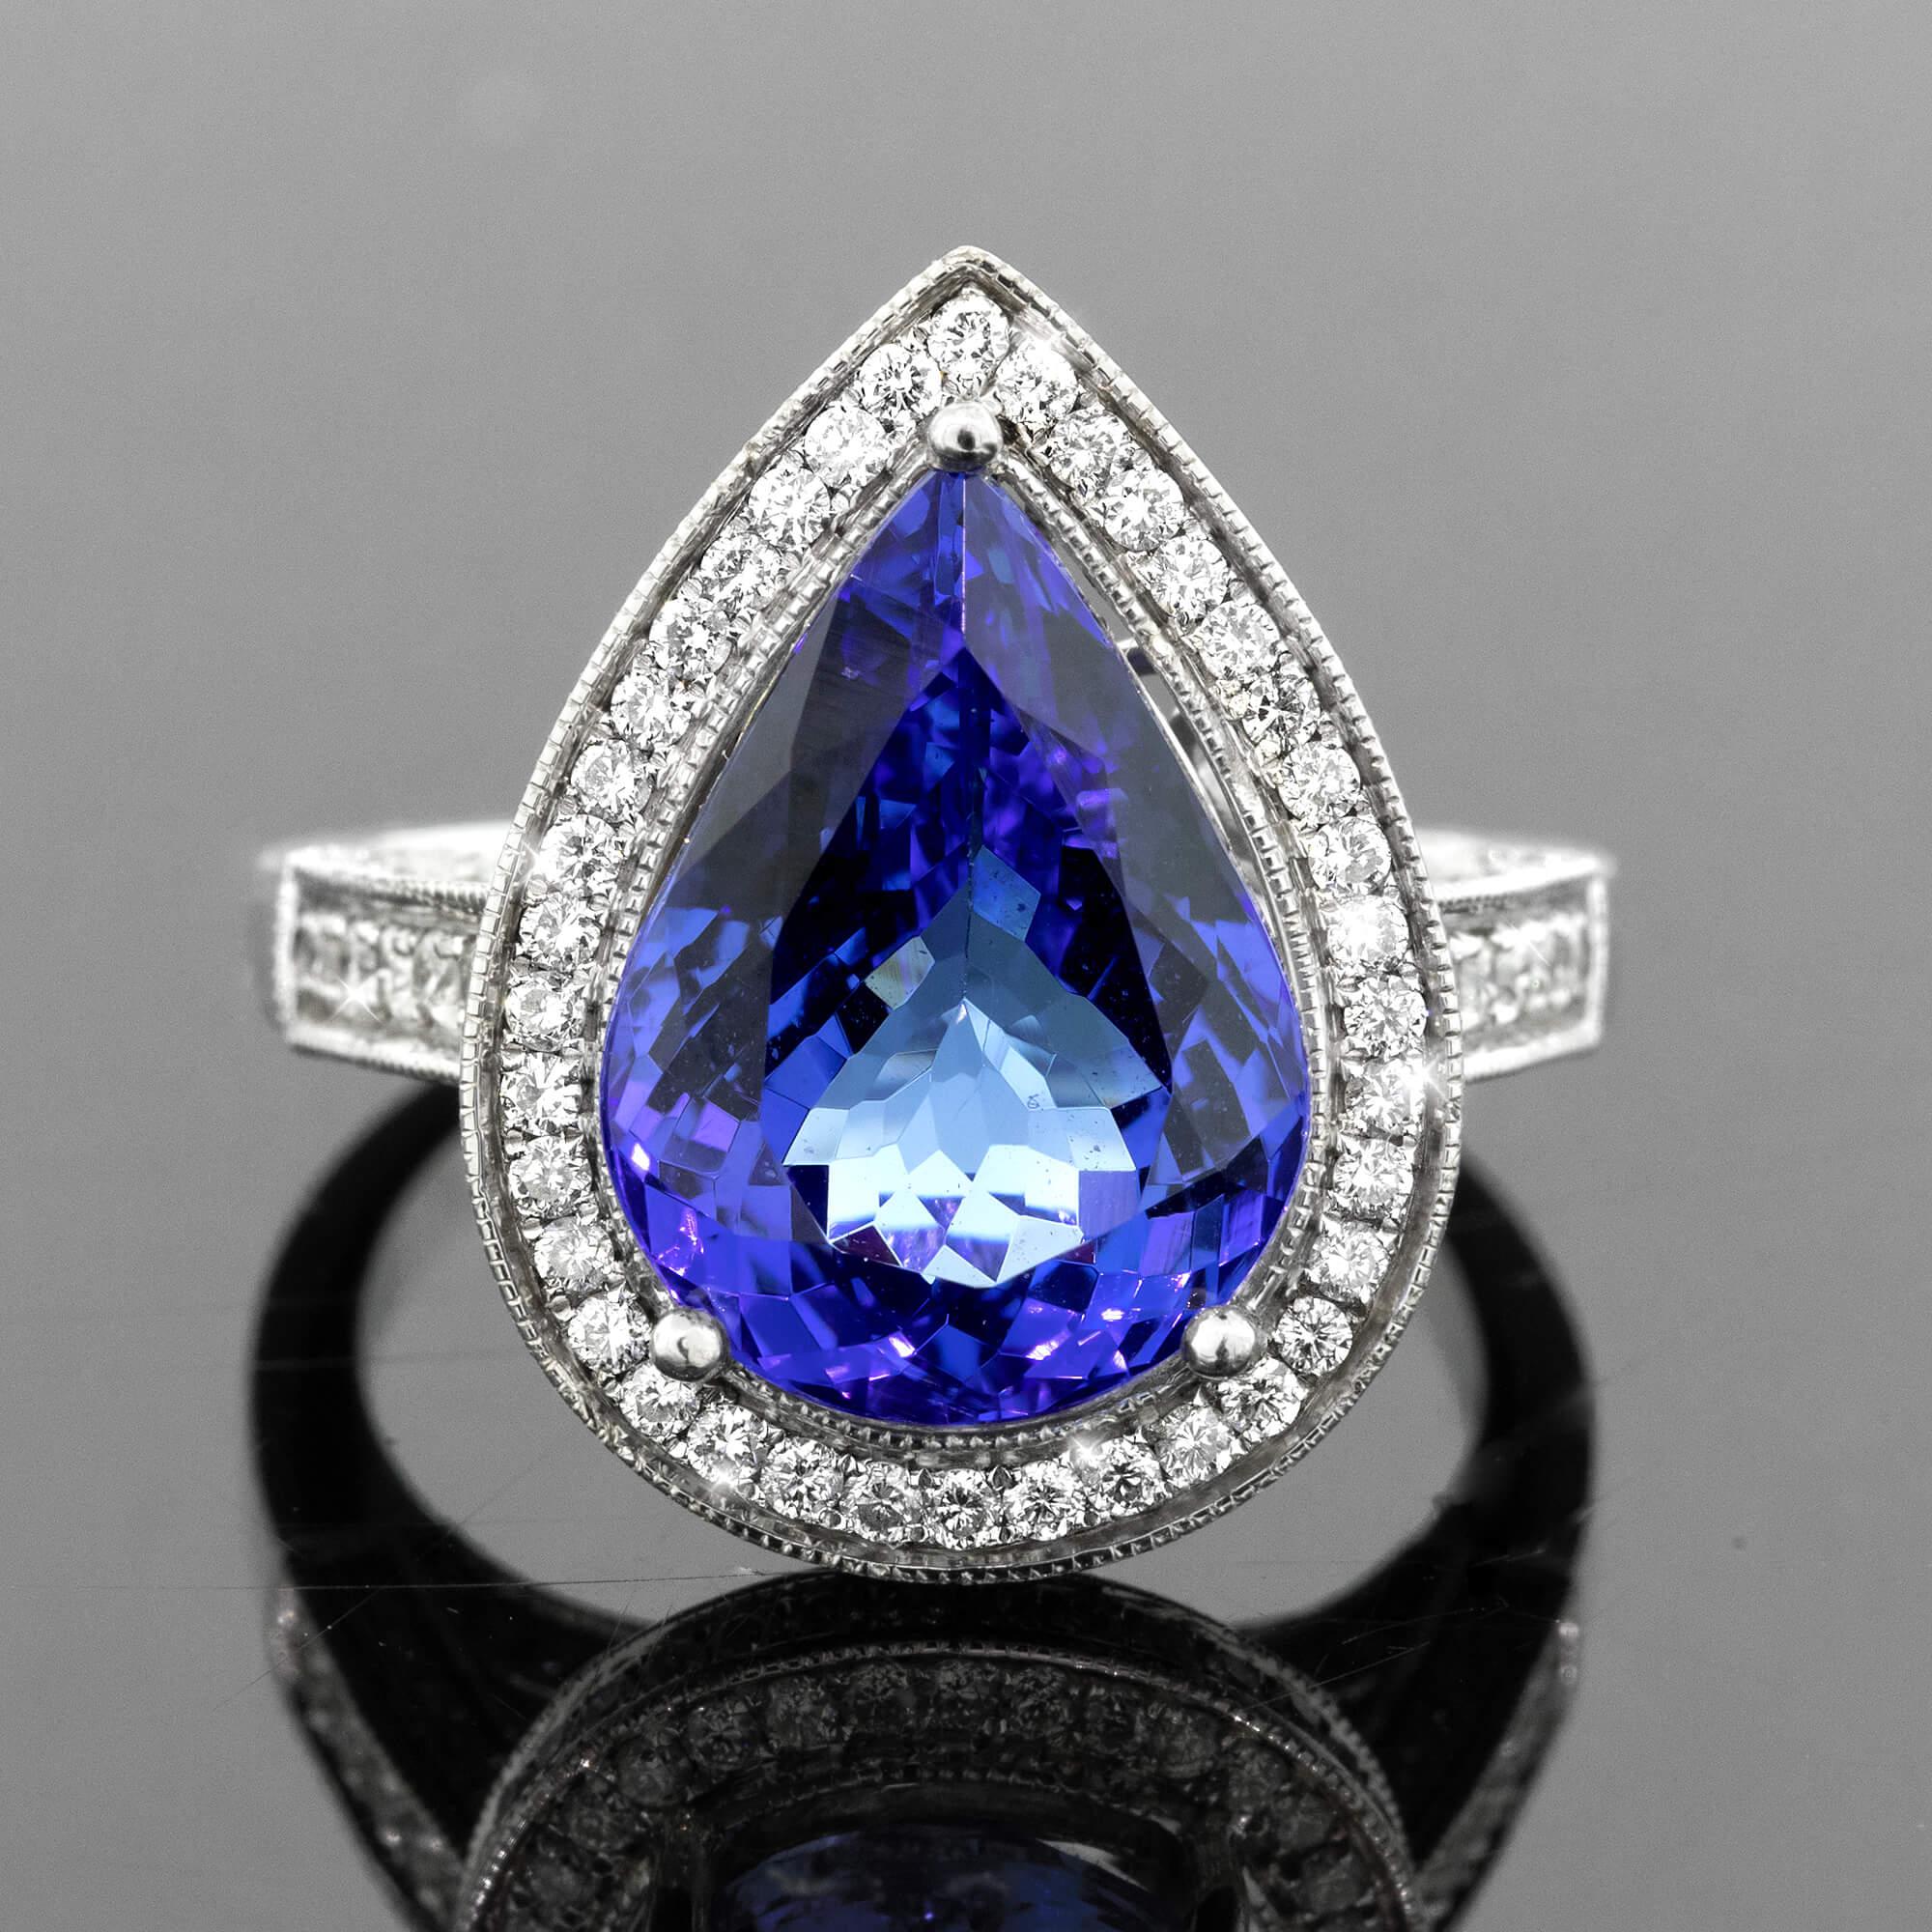 One 14k white gold cast and assembled tanzanite and diamond cluster ring. Featuring a pear cut tanzanite set with three claws. Brilliant cut diamonds grain set in halo, on the side settings and shoulders of the ring. The under gallery has beautiful